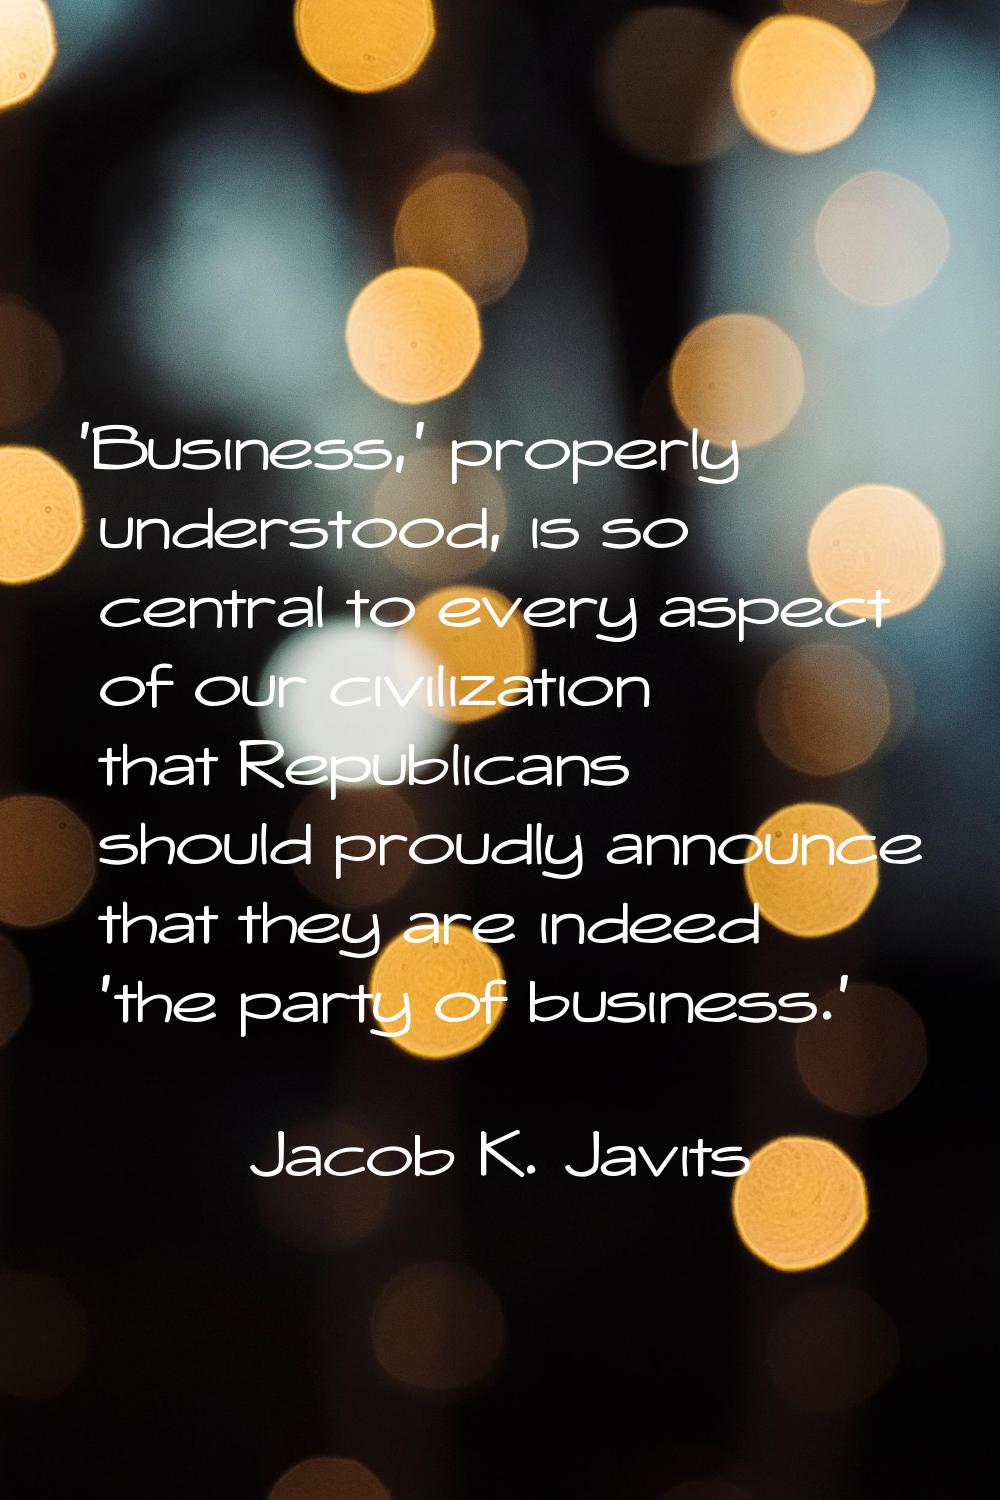 'Business,' properly understood, is so central to every aspect of our civilization that Republicans